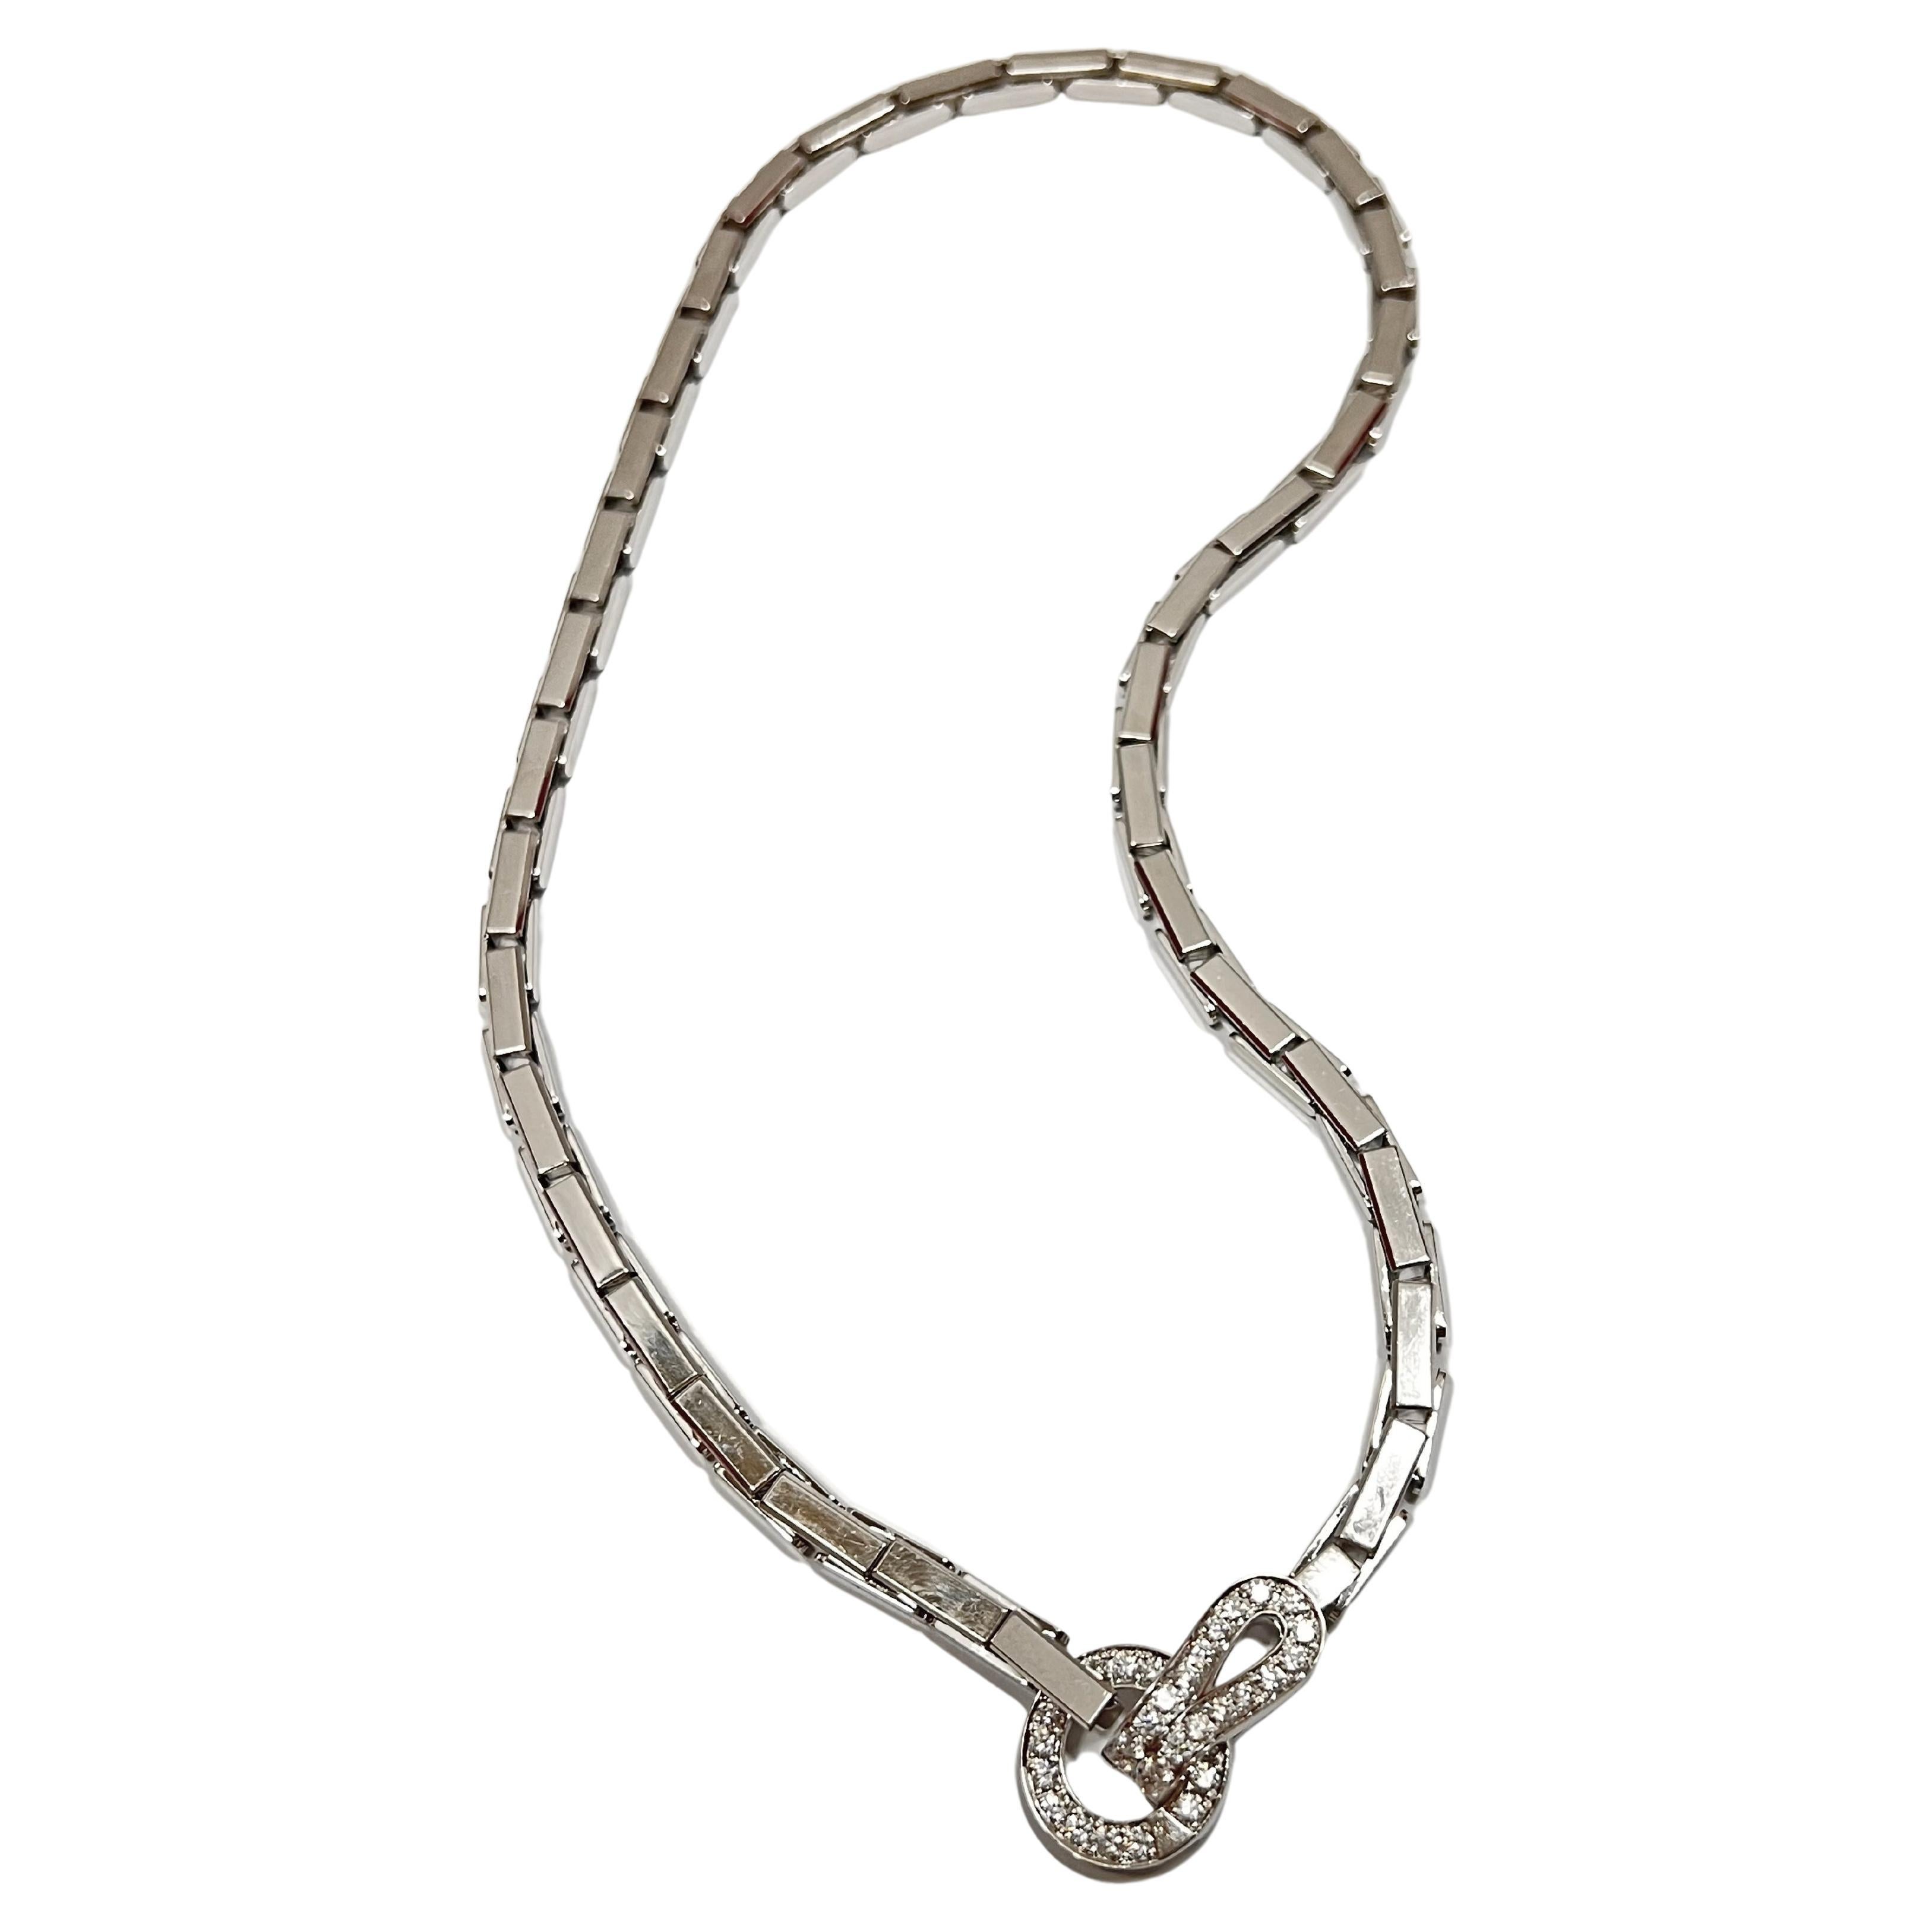 Cartier 18kt white gold and diamond necklace from the Agrafe Collection, featuring polished rectangular links centering a circular buckle design front clasp, accented by thirty-four round brilliant-cut diamonds totaling approximately 1.10 carats